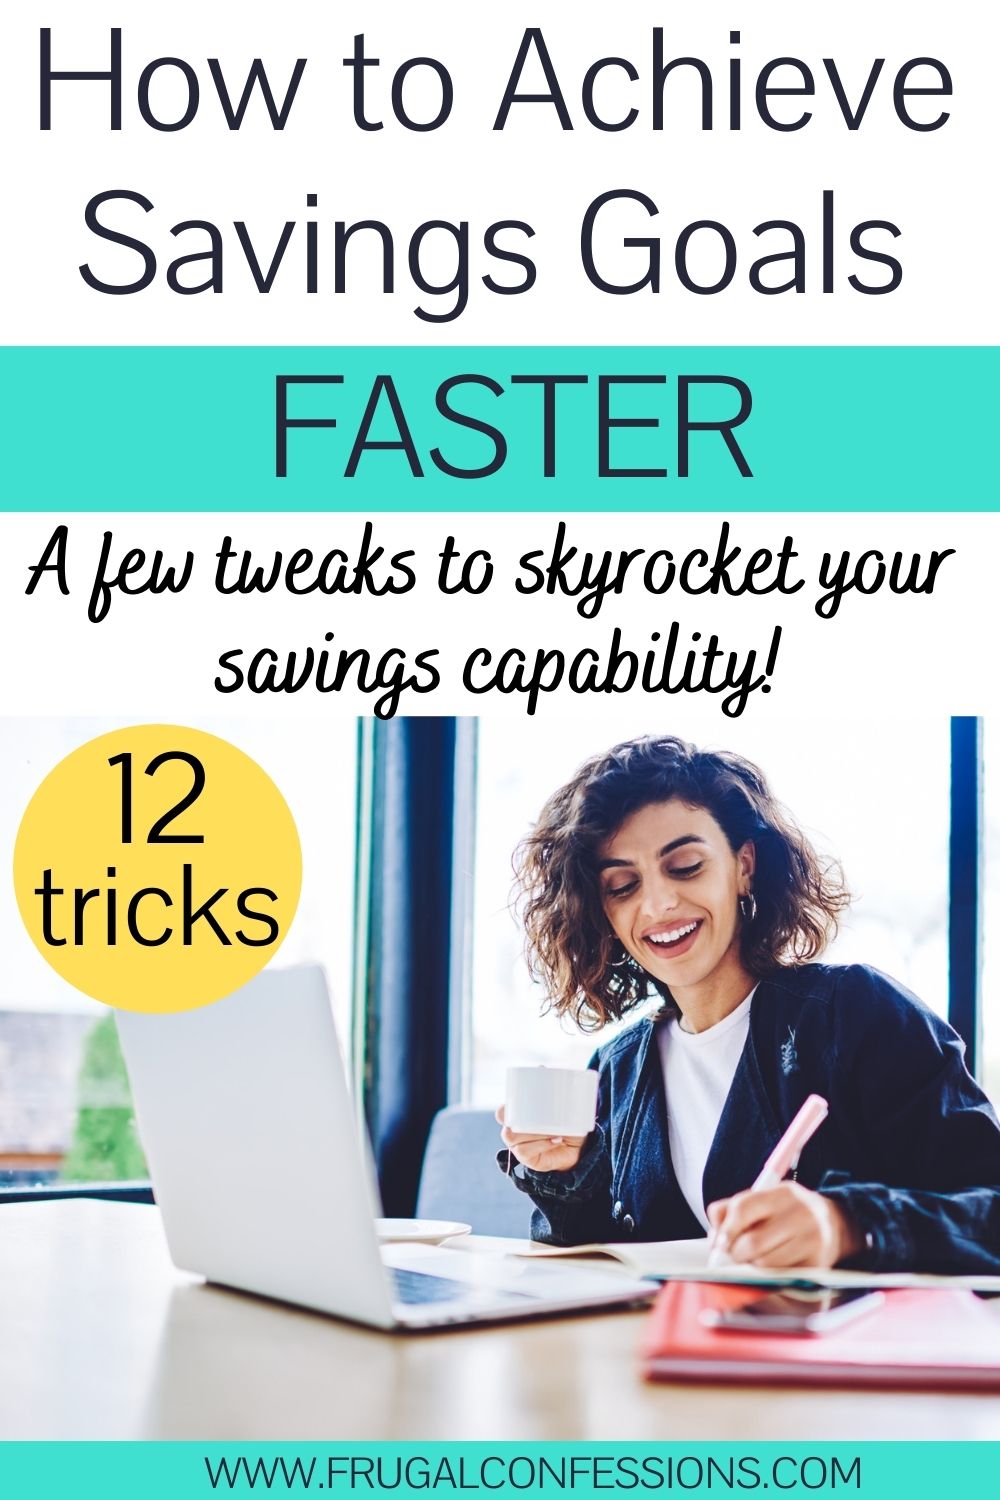 middle aged woman smiling with coffee mug and writing at desk, text overlay "how to achieve savings goals faster - 12 tricks"